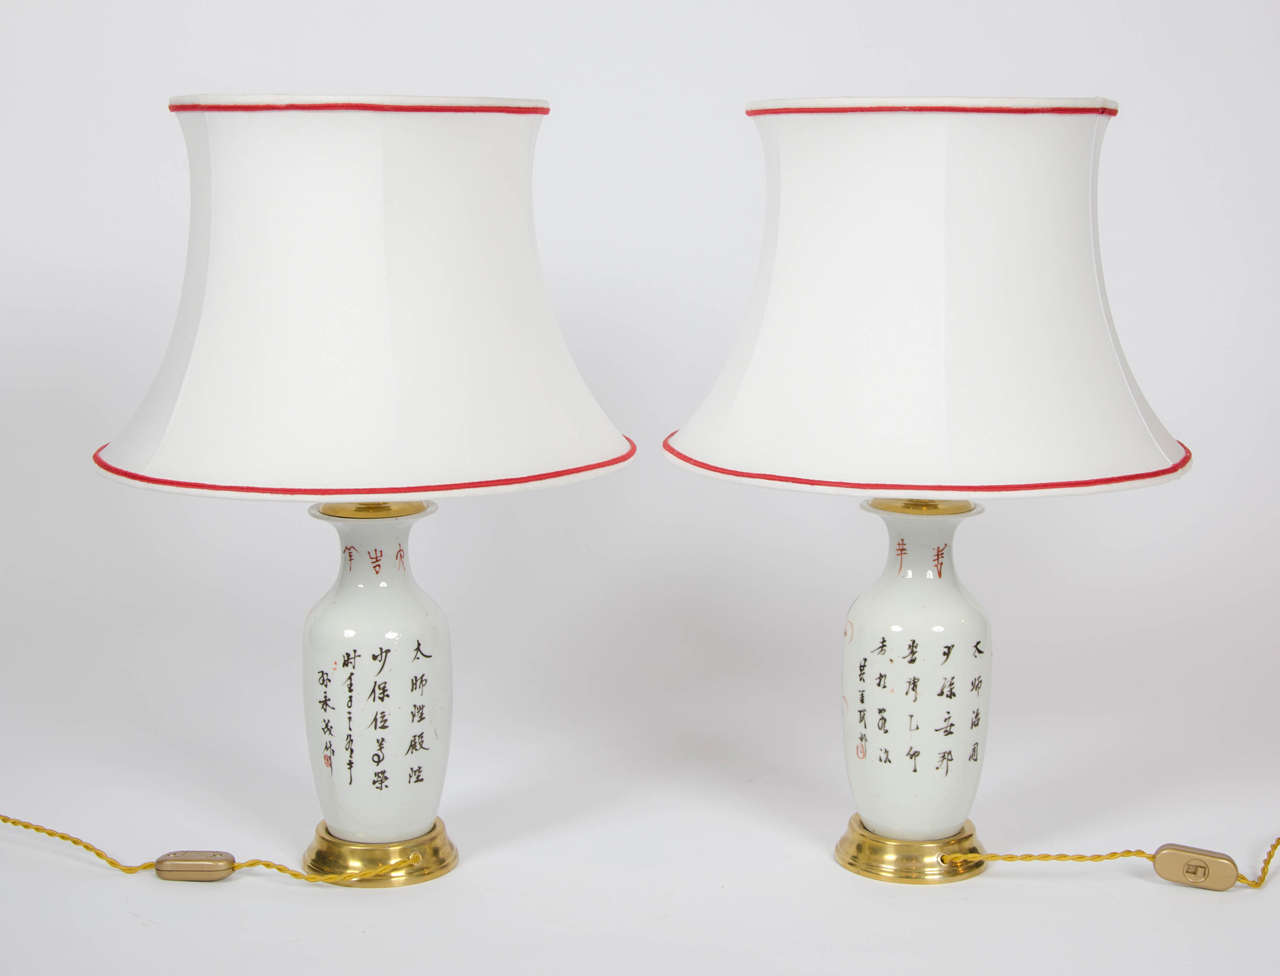 Pair of late 19th century Chinese Porcelain Vases as Table Lamps For Sale 1